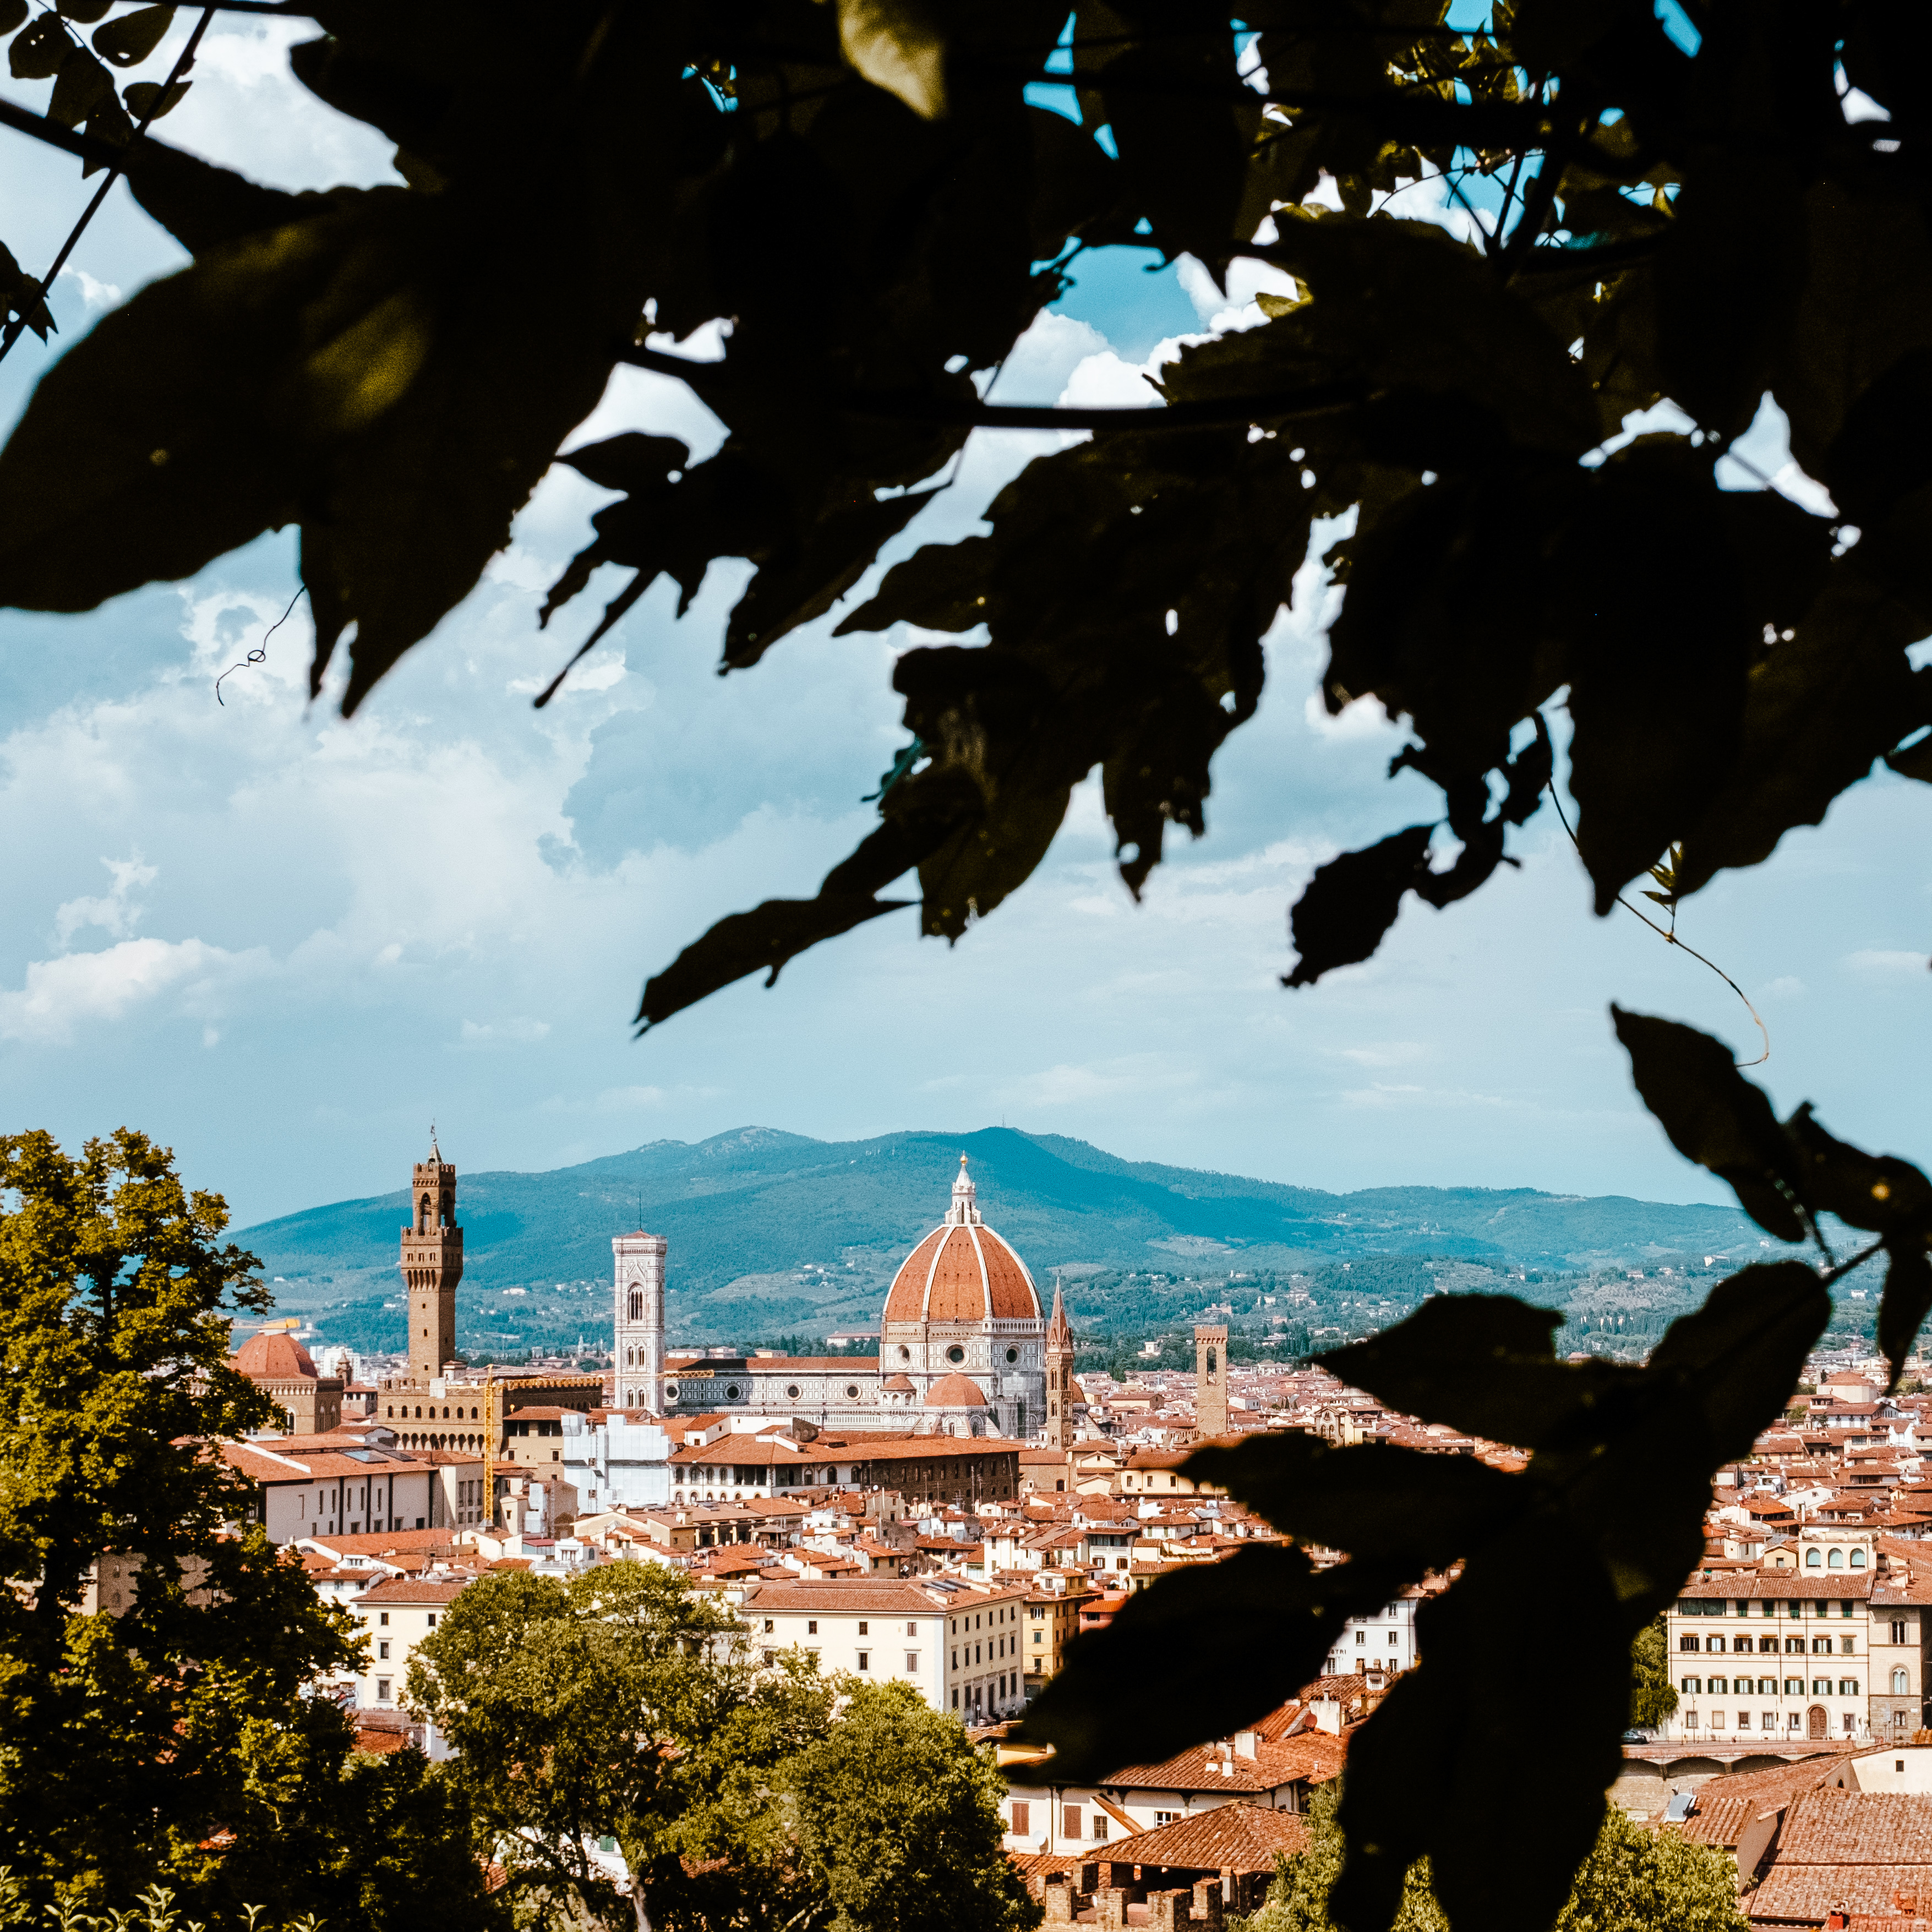 This was our favourite spot in Florence - a place to relax and have a picnic